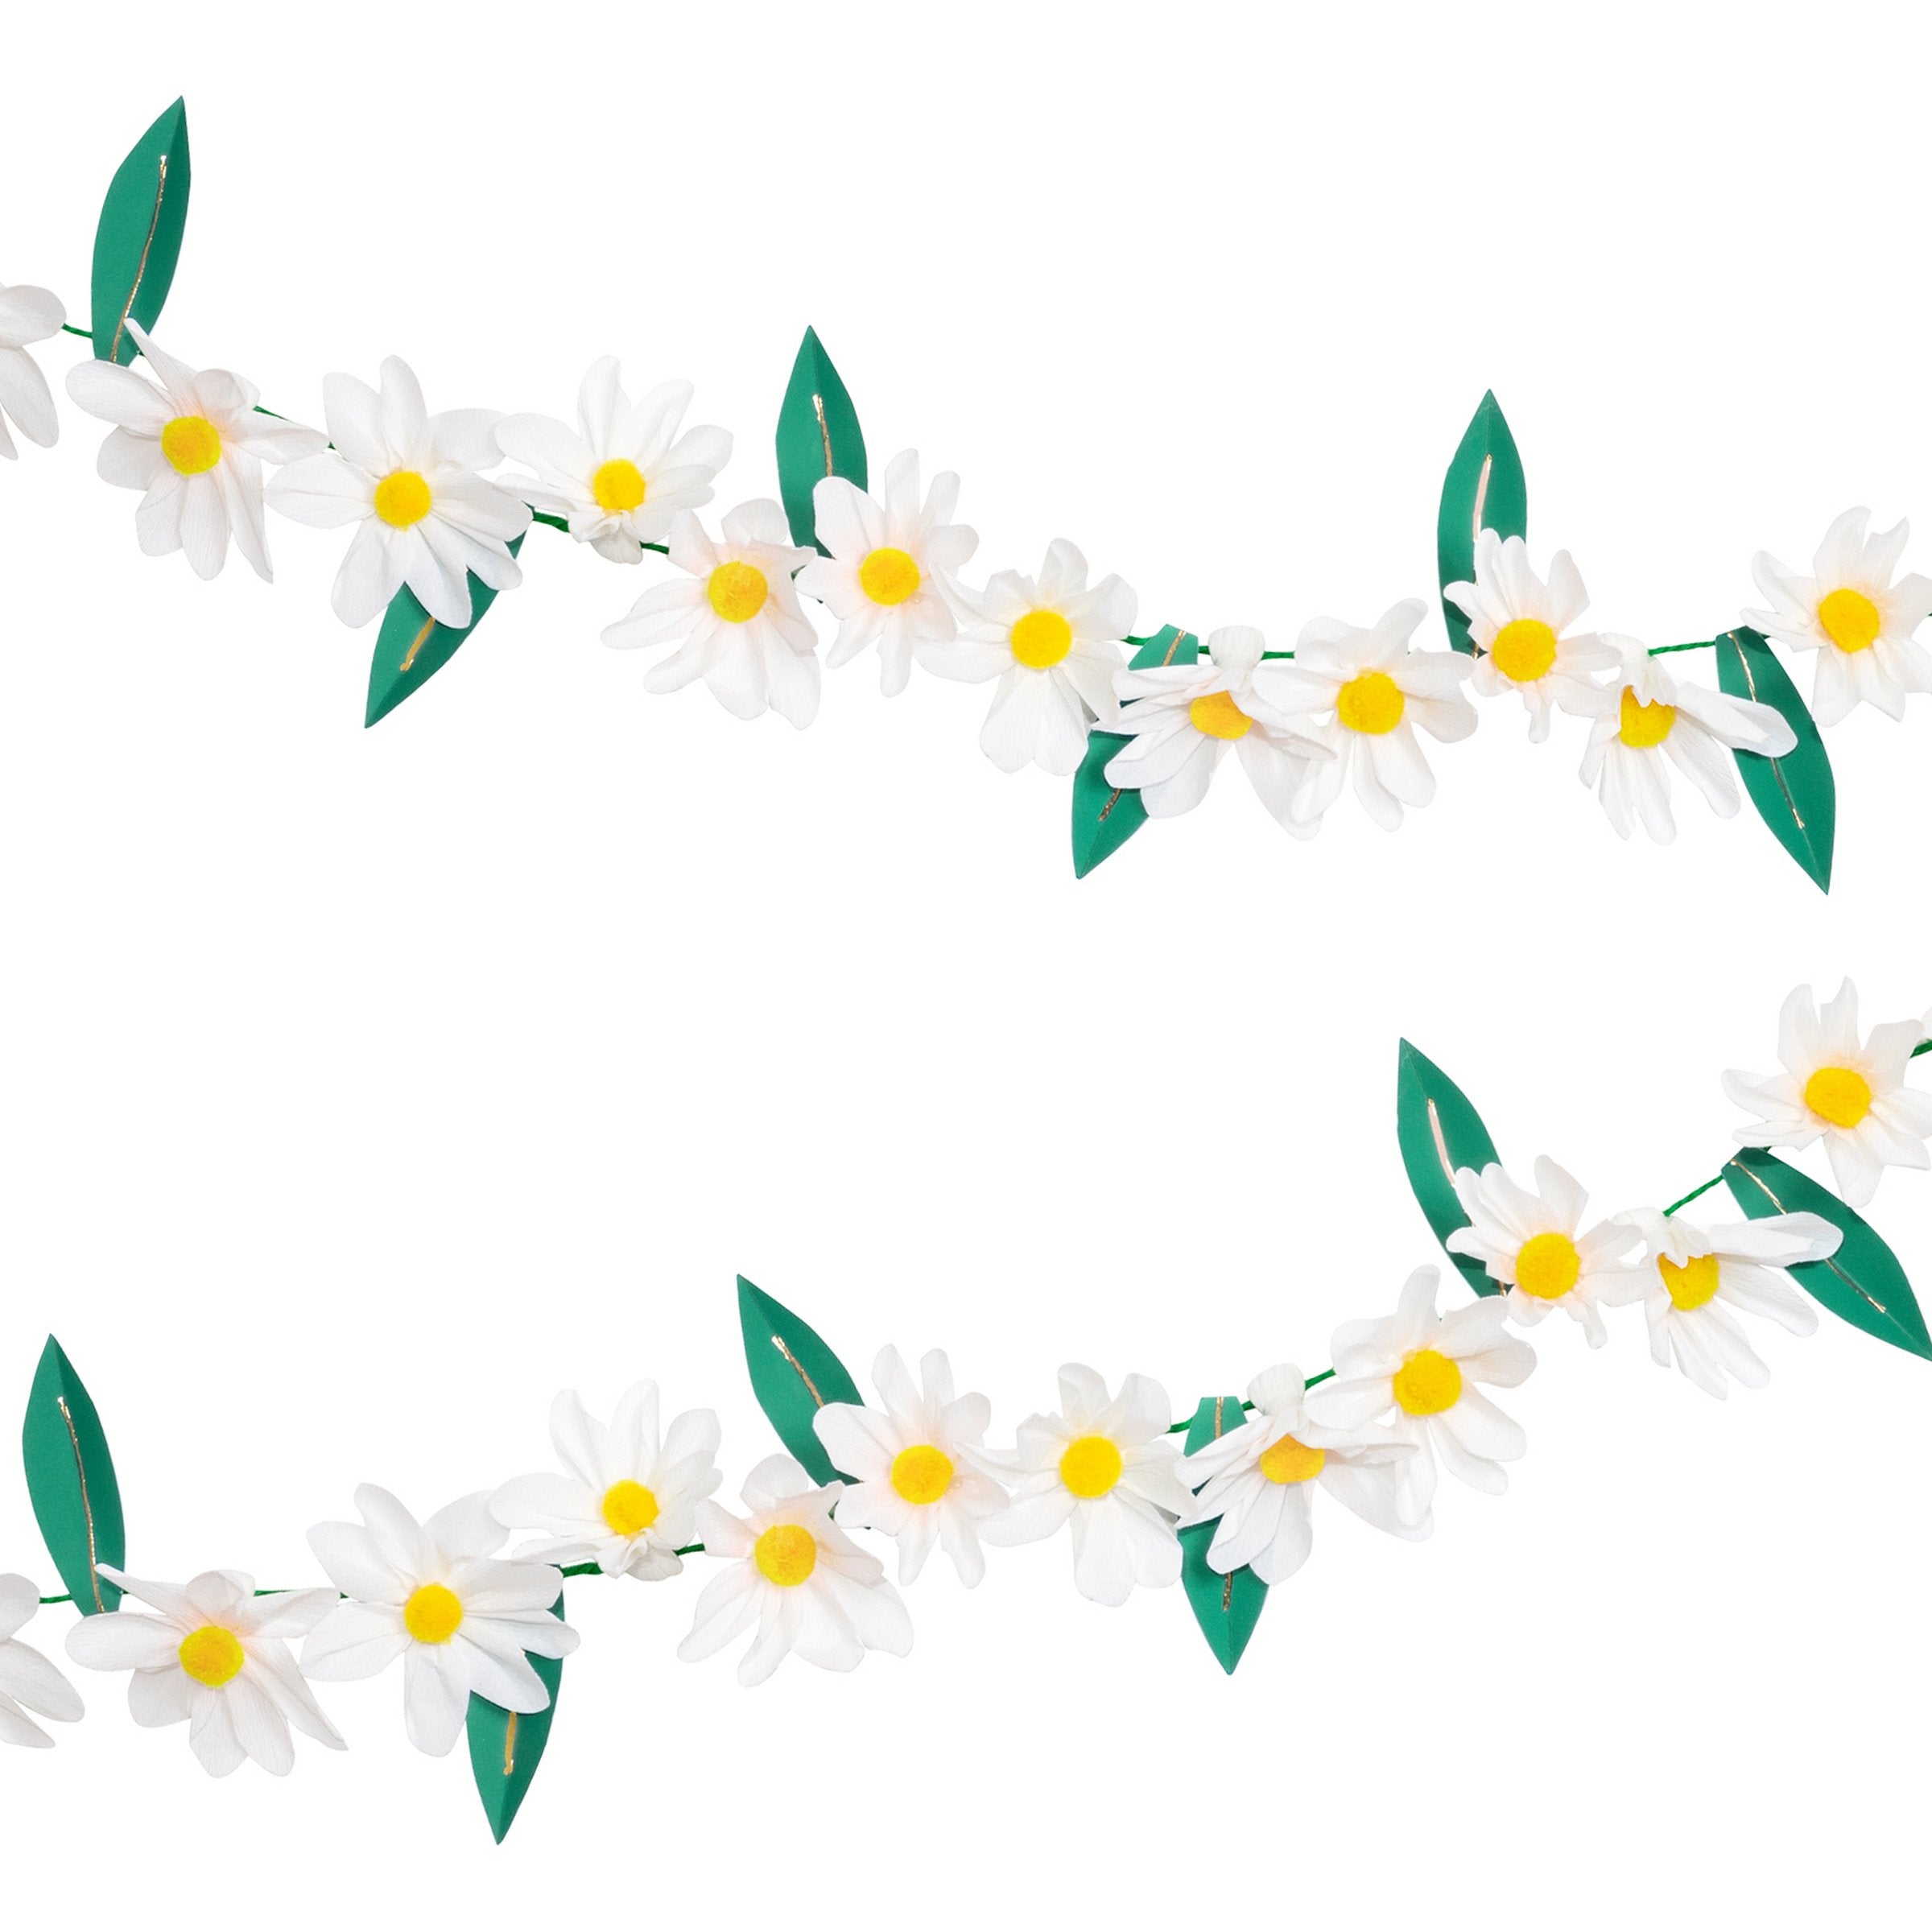 The garland features crepe paper daisies and 3D paper leaves with a gold foil shimmer.